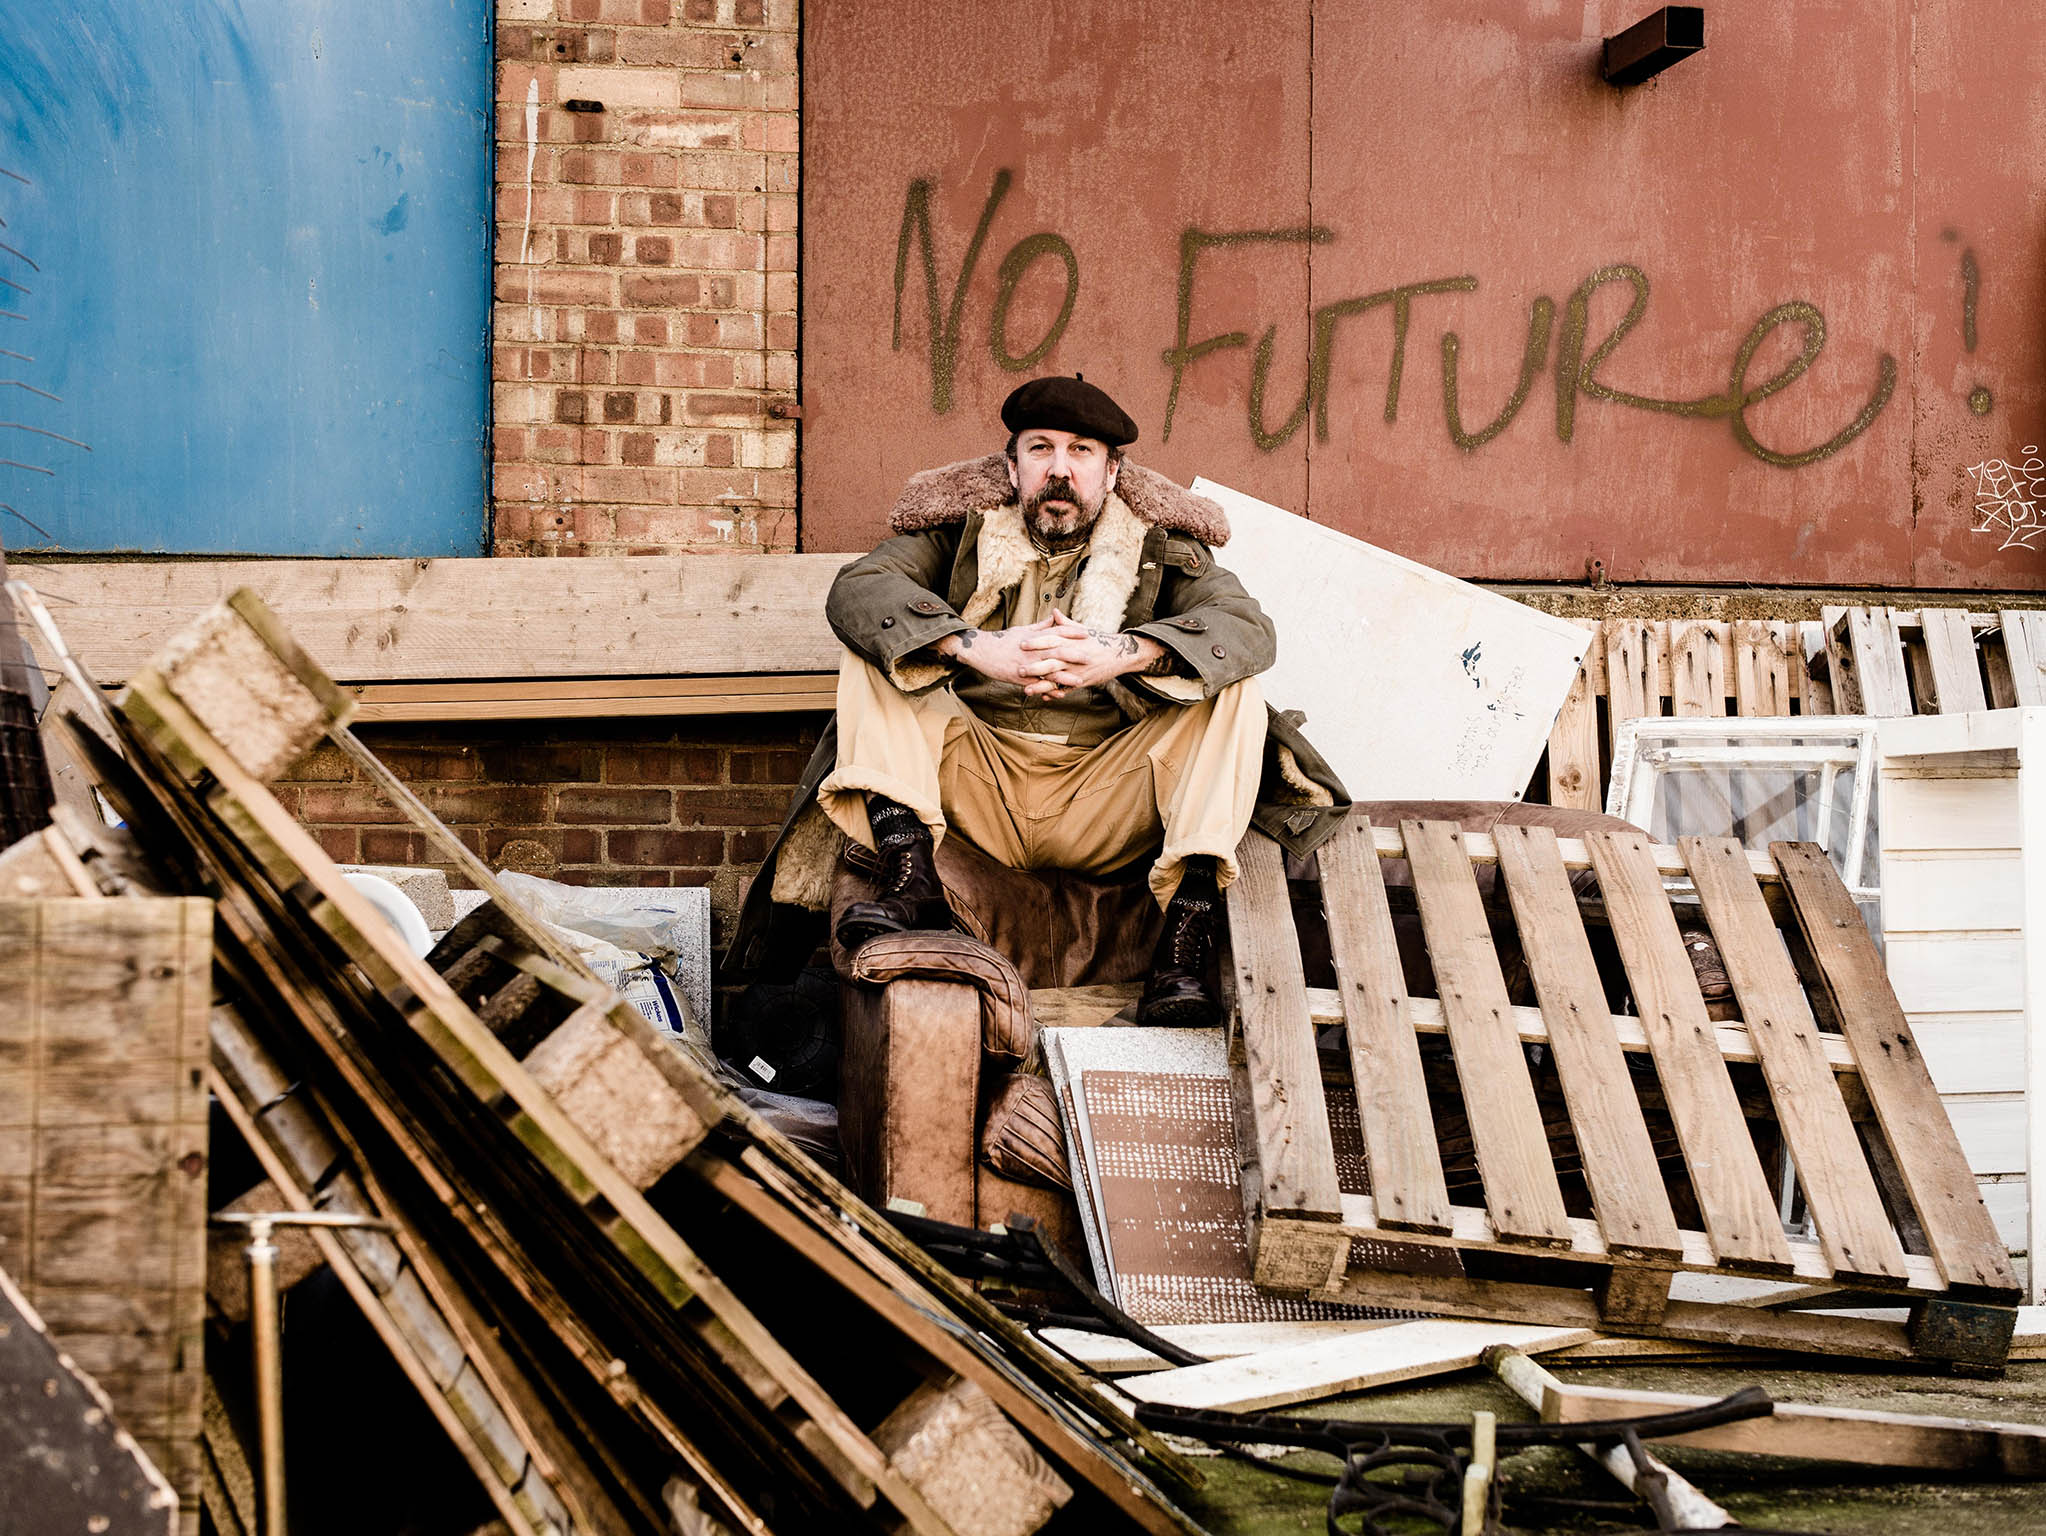 Until recently Andrew Weatherall was based in Shoreditch, where he’d been for 20 years, but then the hipsters arrived